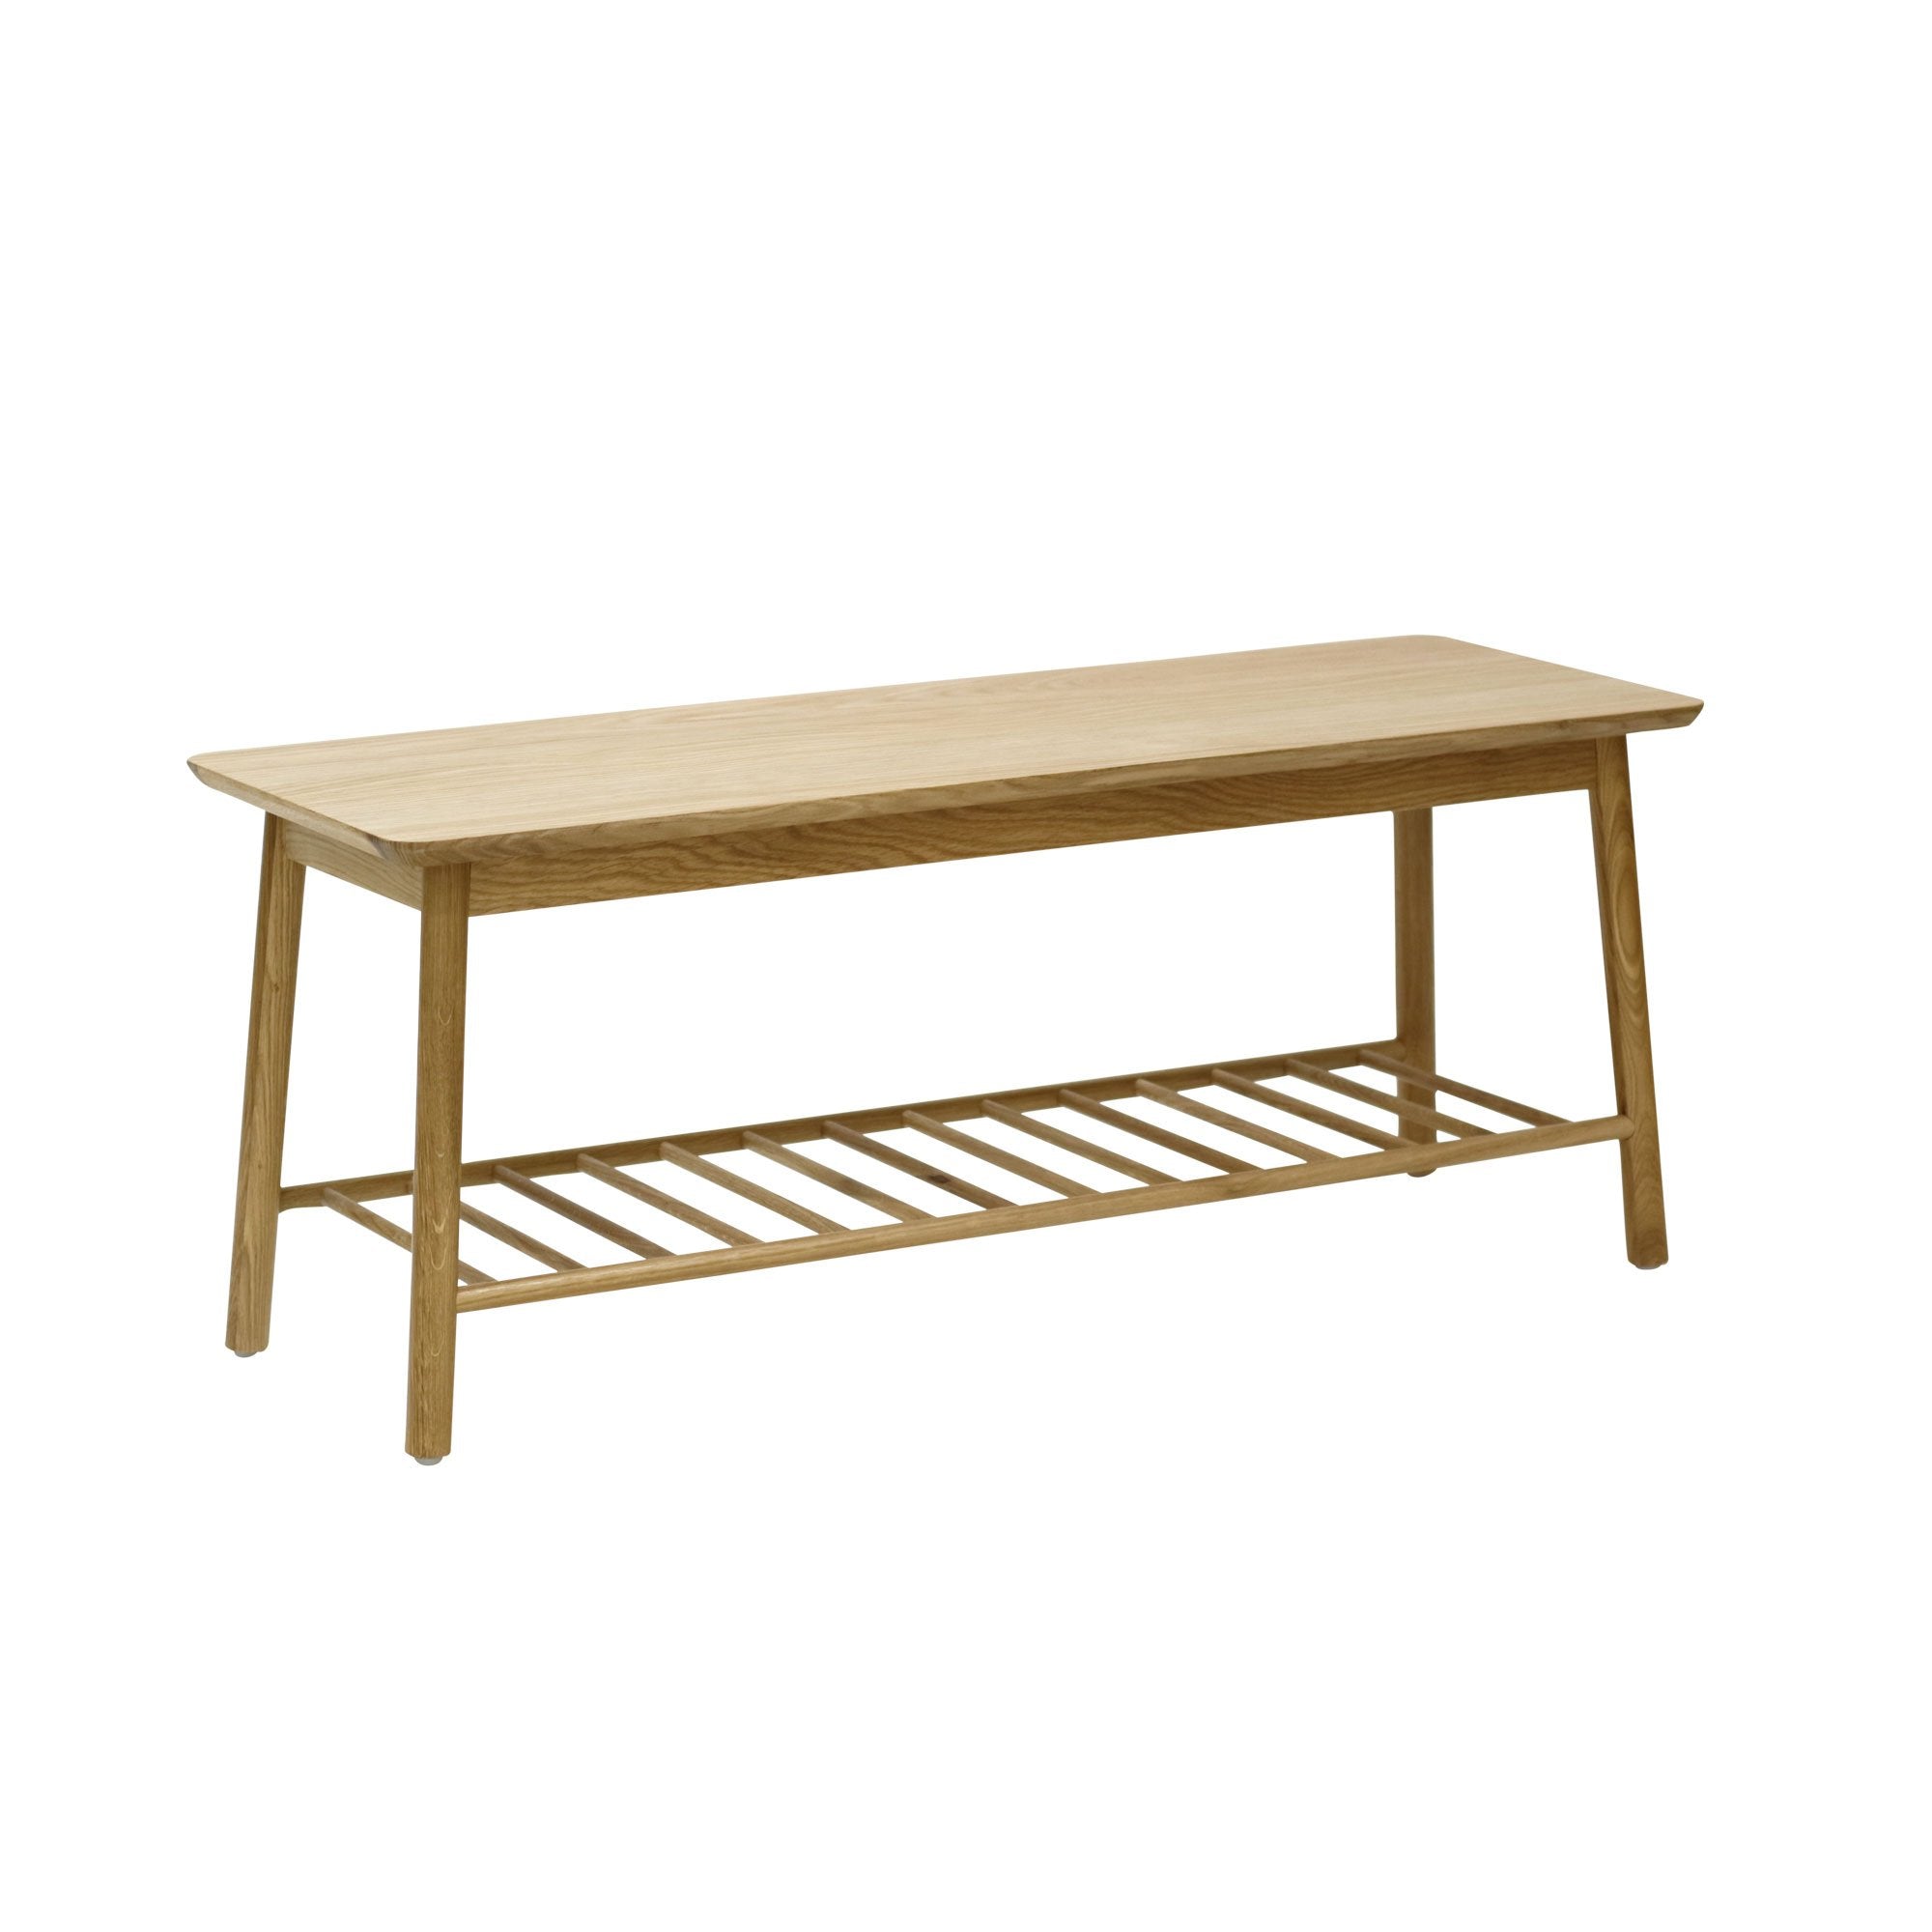 Japandi Rectangular Wooden Open Shelf Coffee Table - Natural Fast shipping On sale